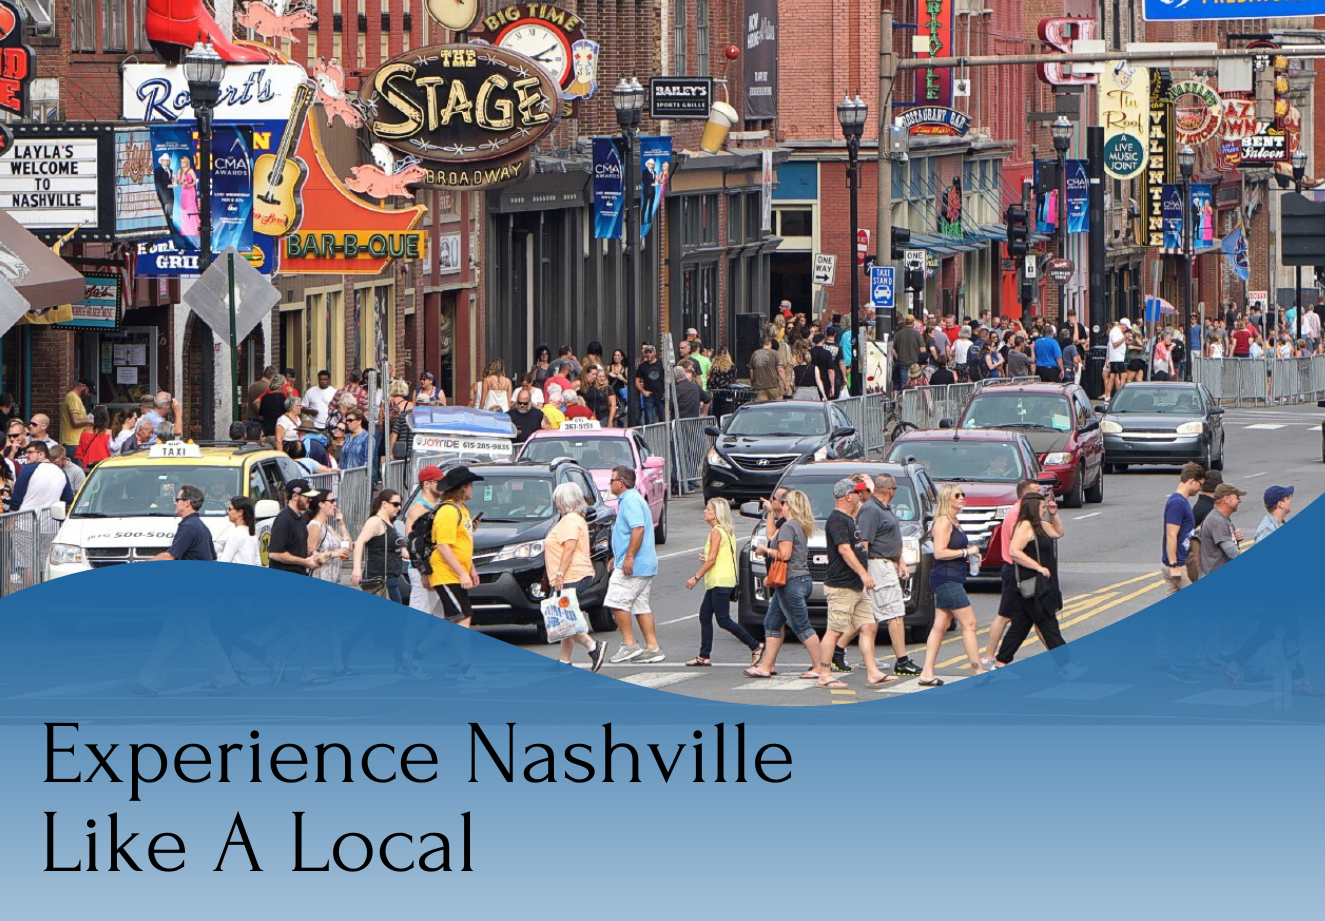 A flock of people walking on a street and a written text of " experience nashville like a local".